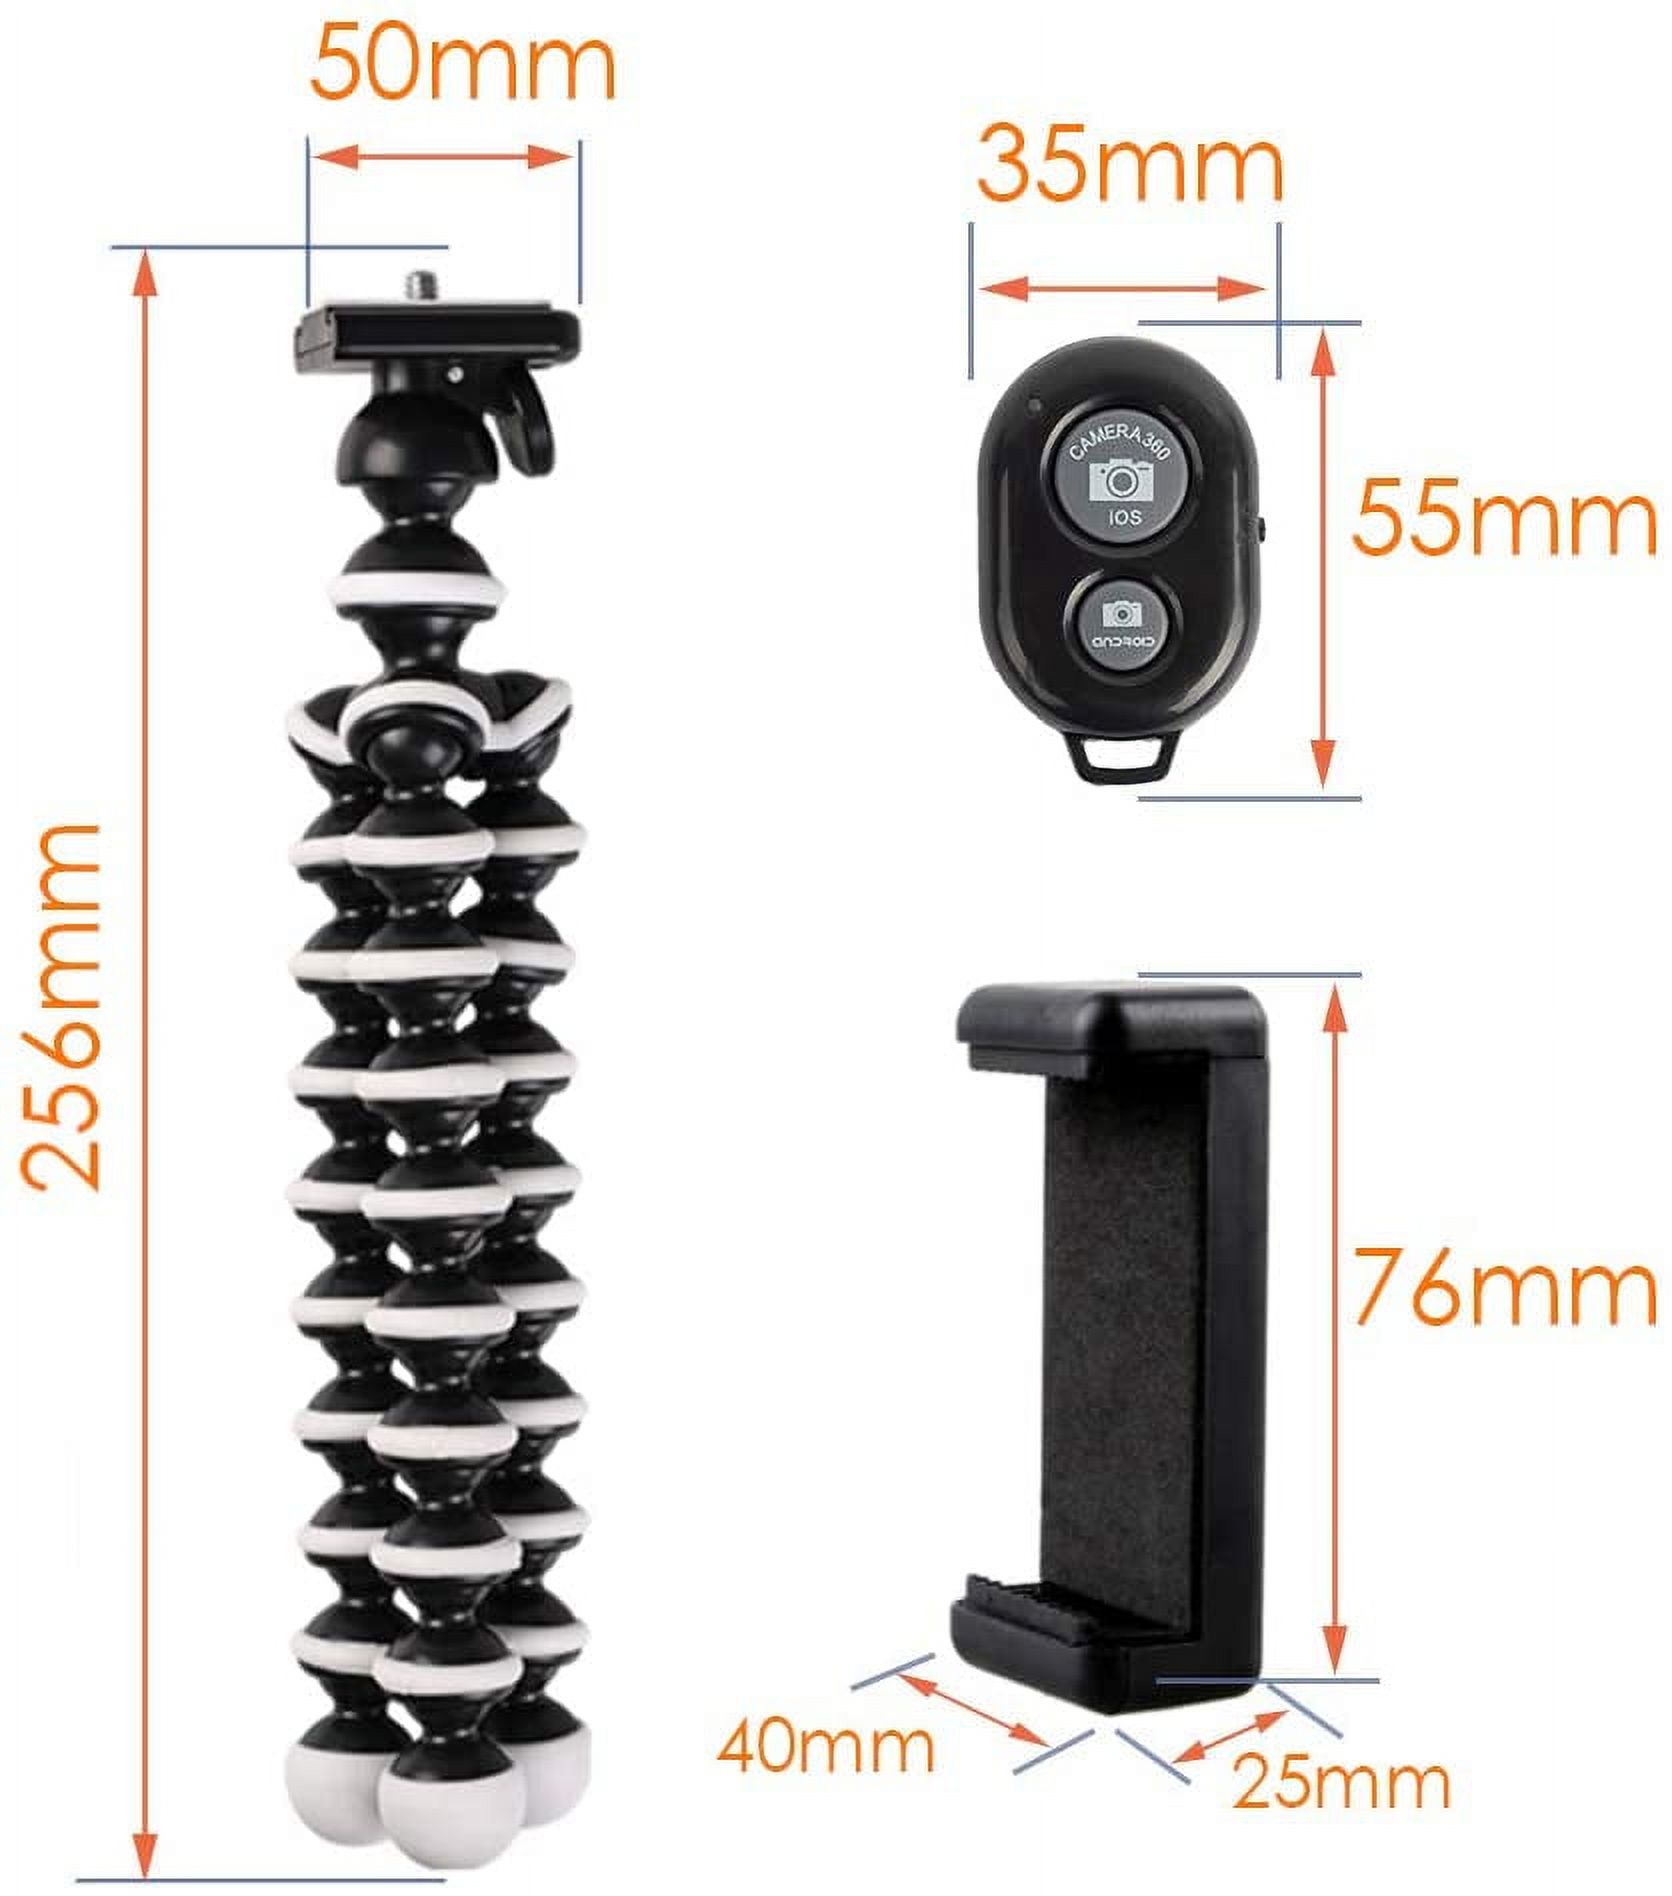 Phone Tripod, Portable Cell Phone Tripod Camera Tripod Stand with Wireless Remote Flexible Tripod Stand Compatible for iPhone 11 Pro Xs MAX XR X SE 8 7 6S Plus Samsung Android Phones Gopro Camera - image 5 of 7